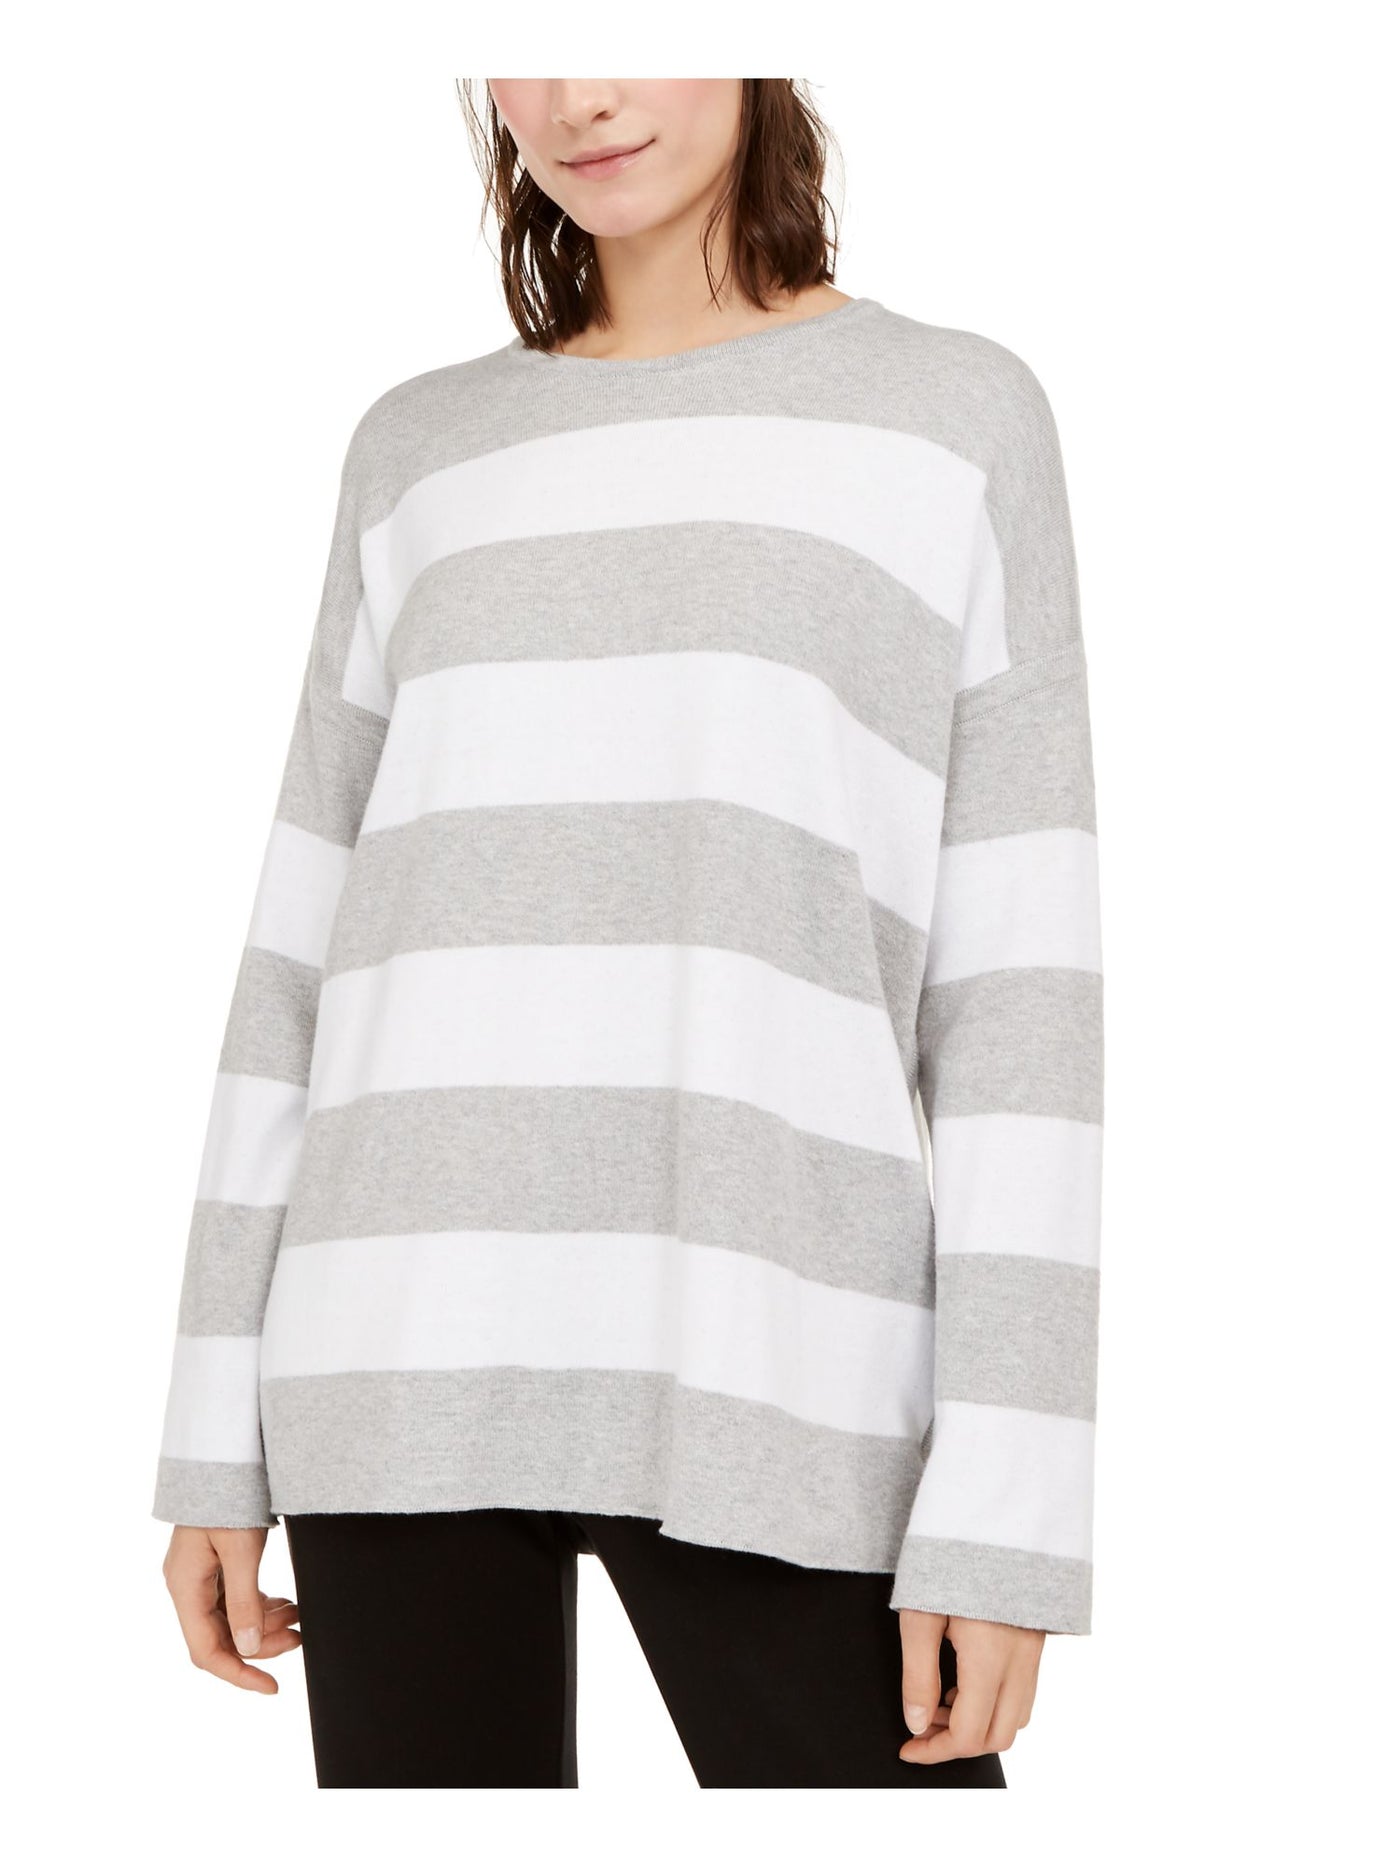 EILEEN FISHER Womens Gray Ribbed Drop Shoulders Striped Long Sleeve Round Neck Sweater S